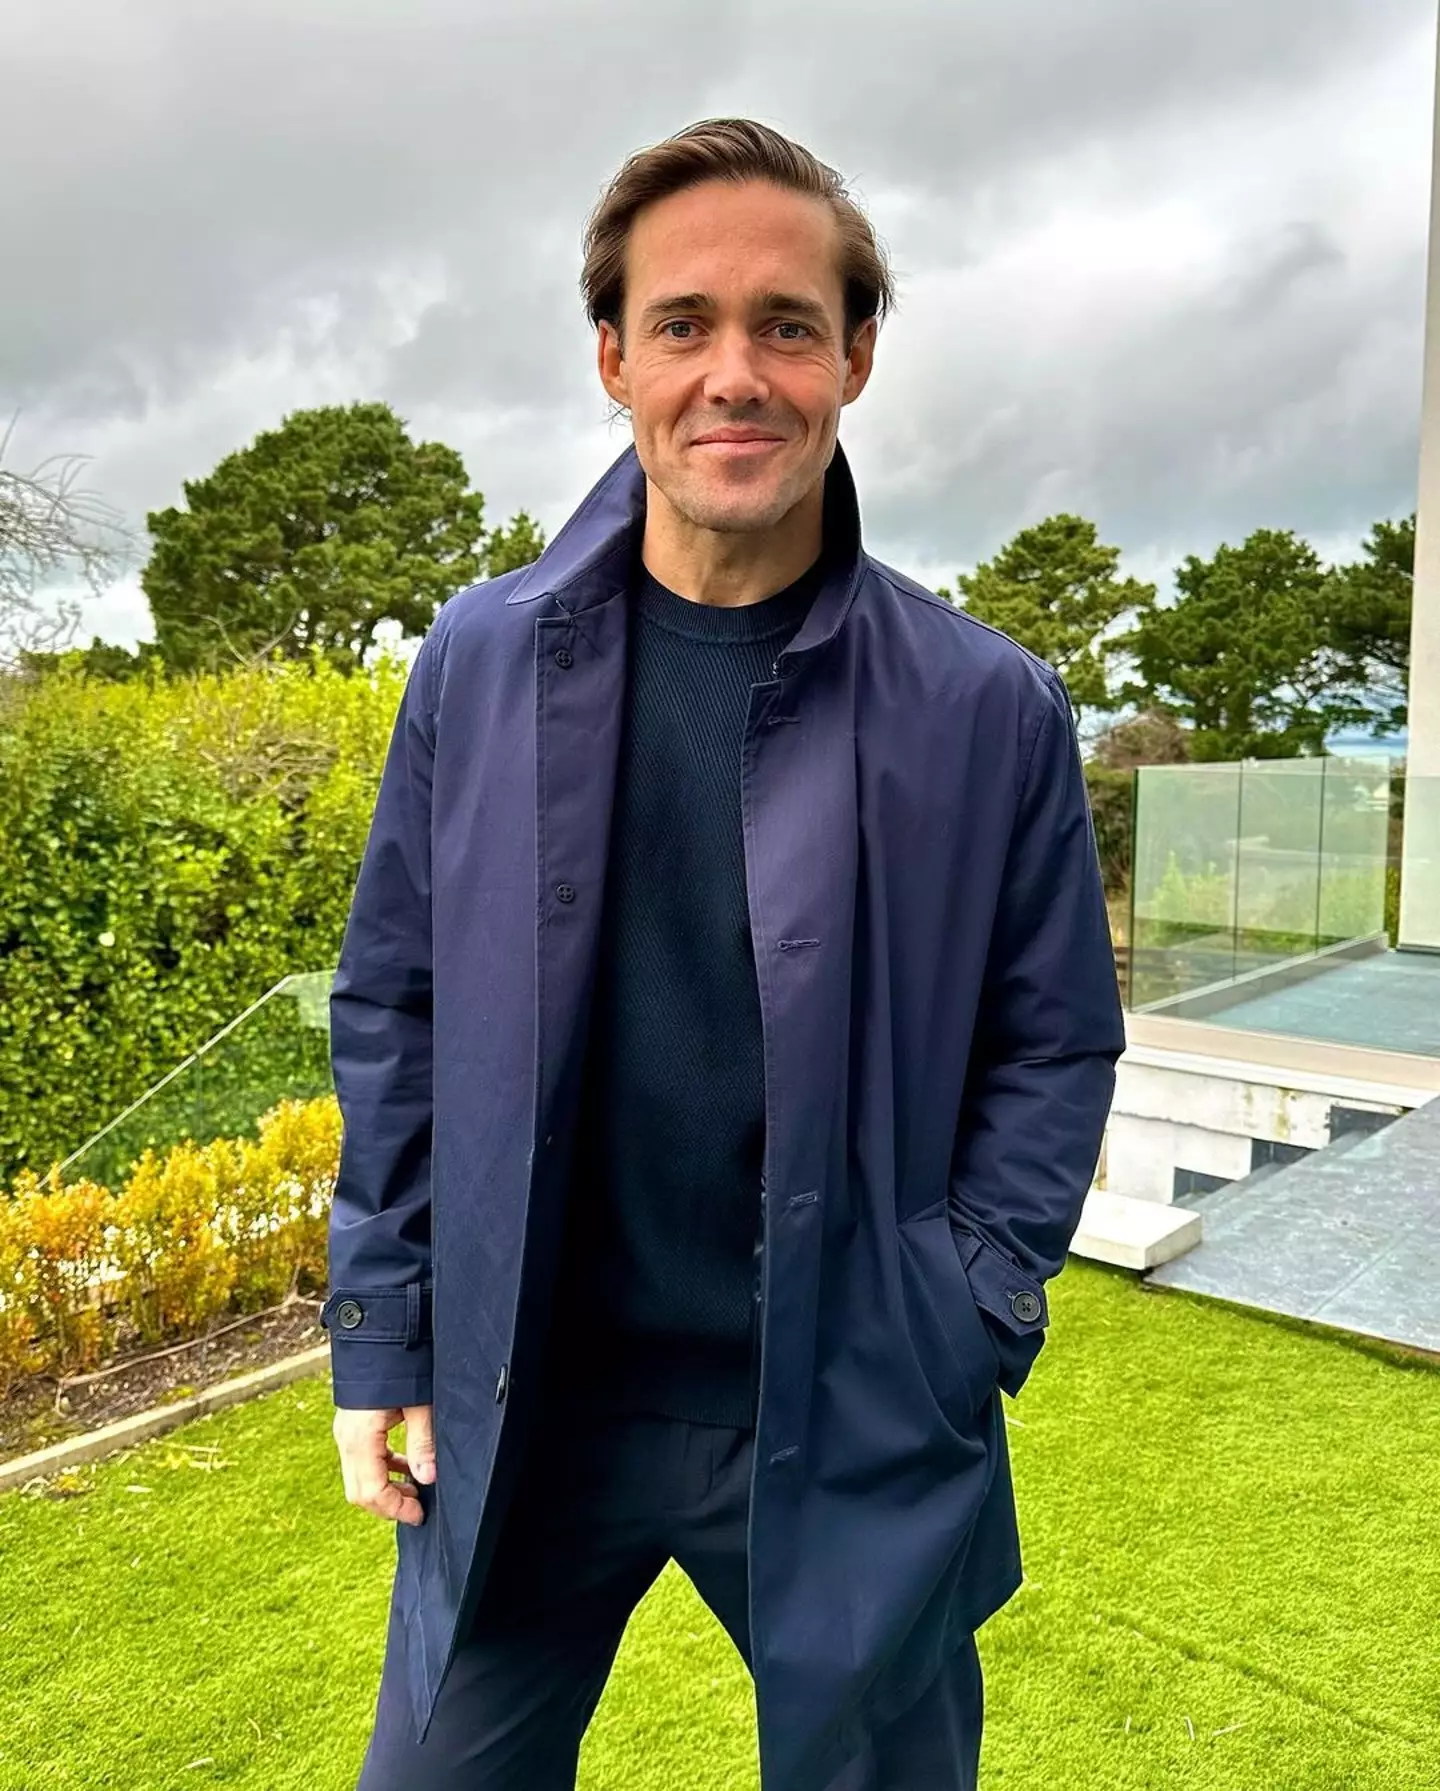 Spencer Matthews' latest Instagram post sparked concern over his sudden 'weight loss'.